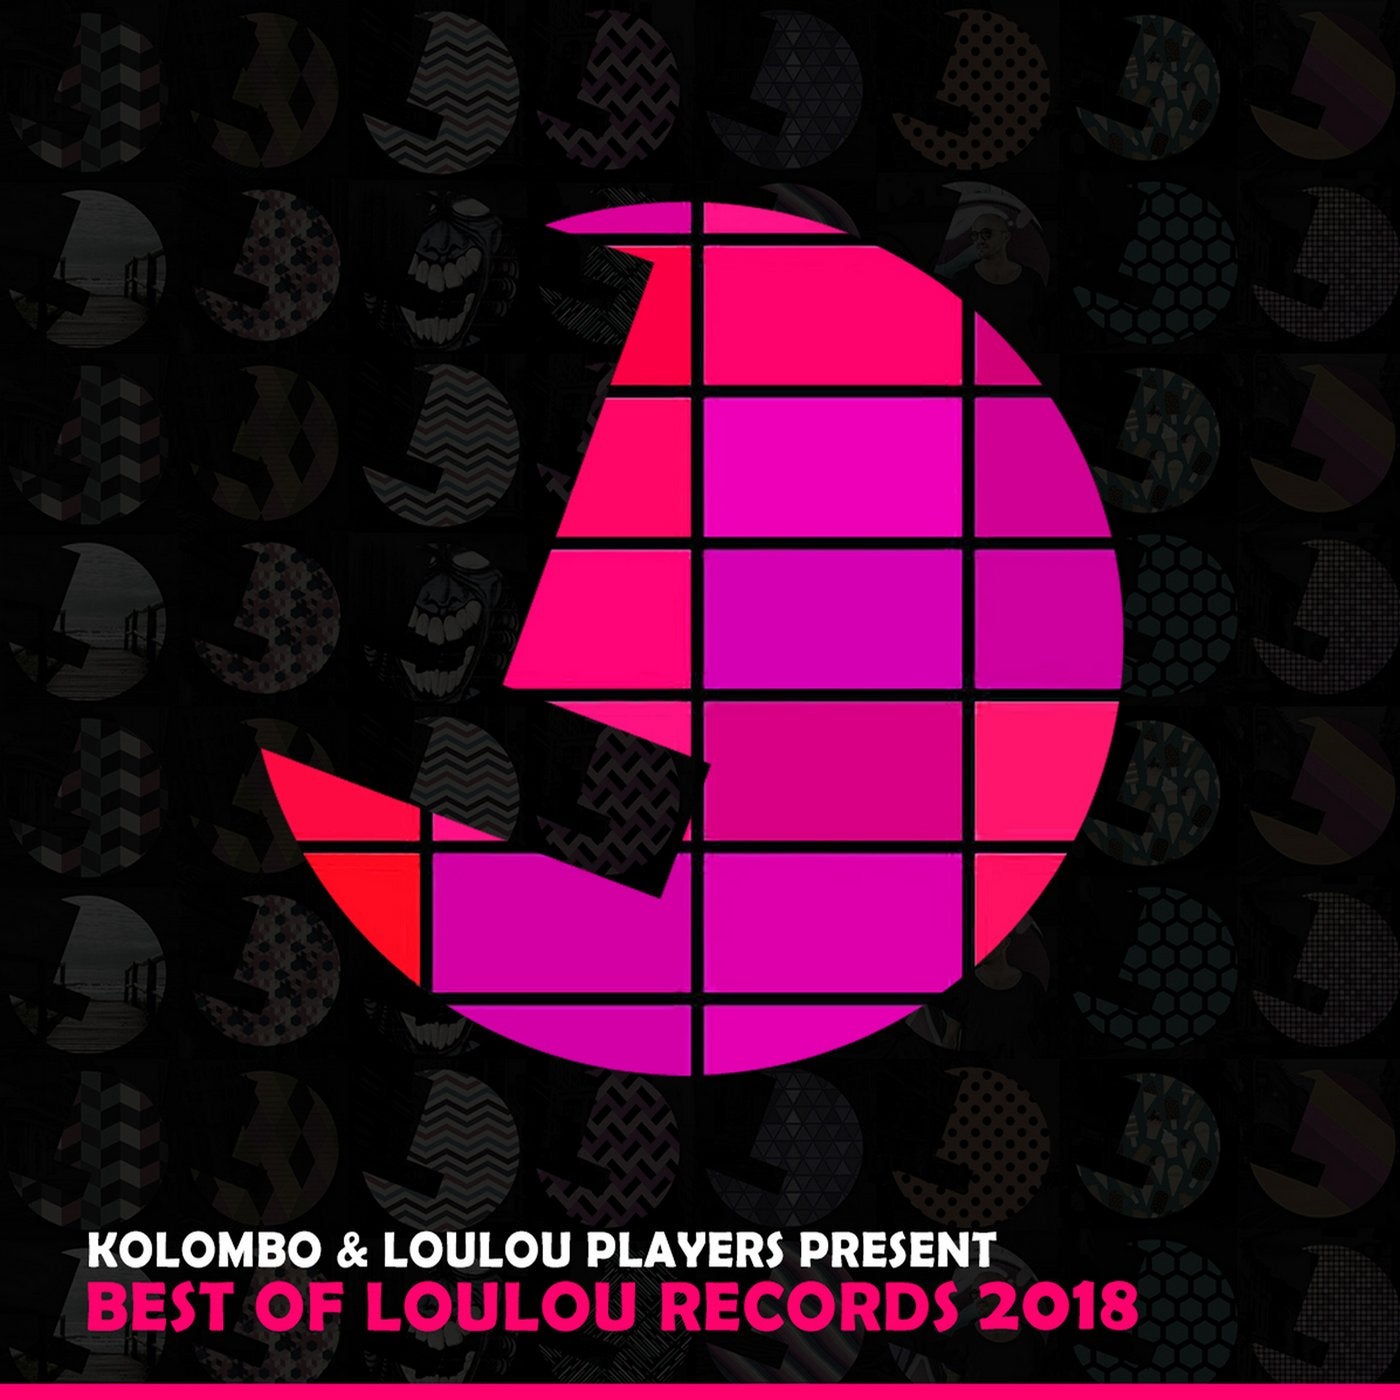 Kolombo & Loulou Players present Best Of Loulou records 2018